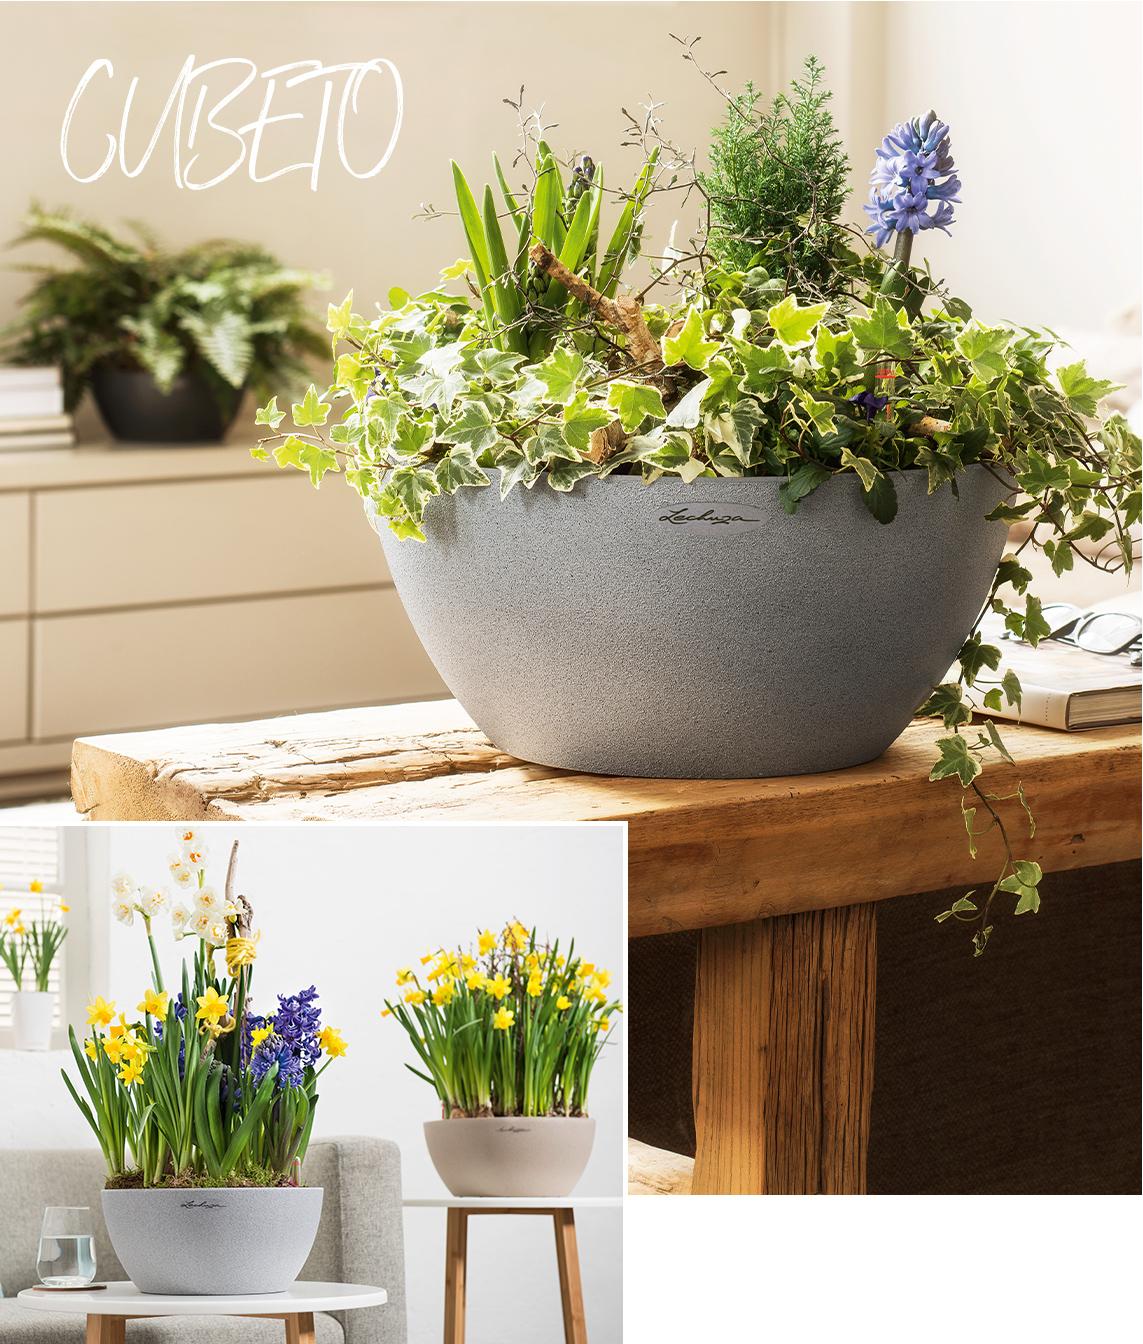 Grey stone-look planter planted with lovely early bloomers such as daffodil and hyacinth